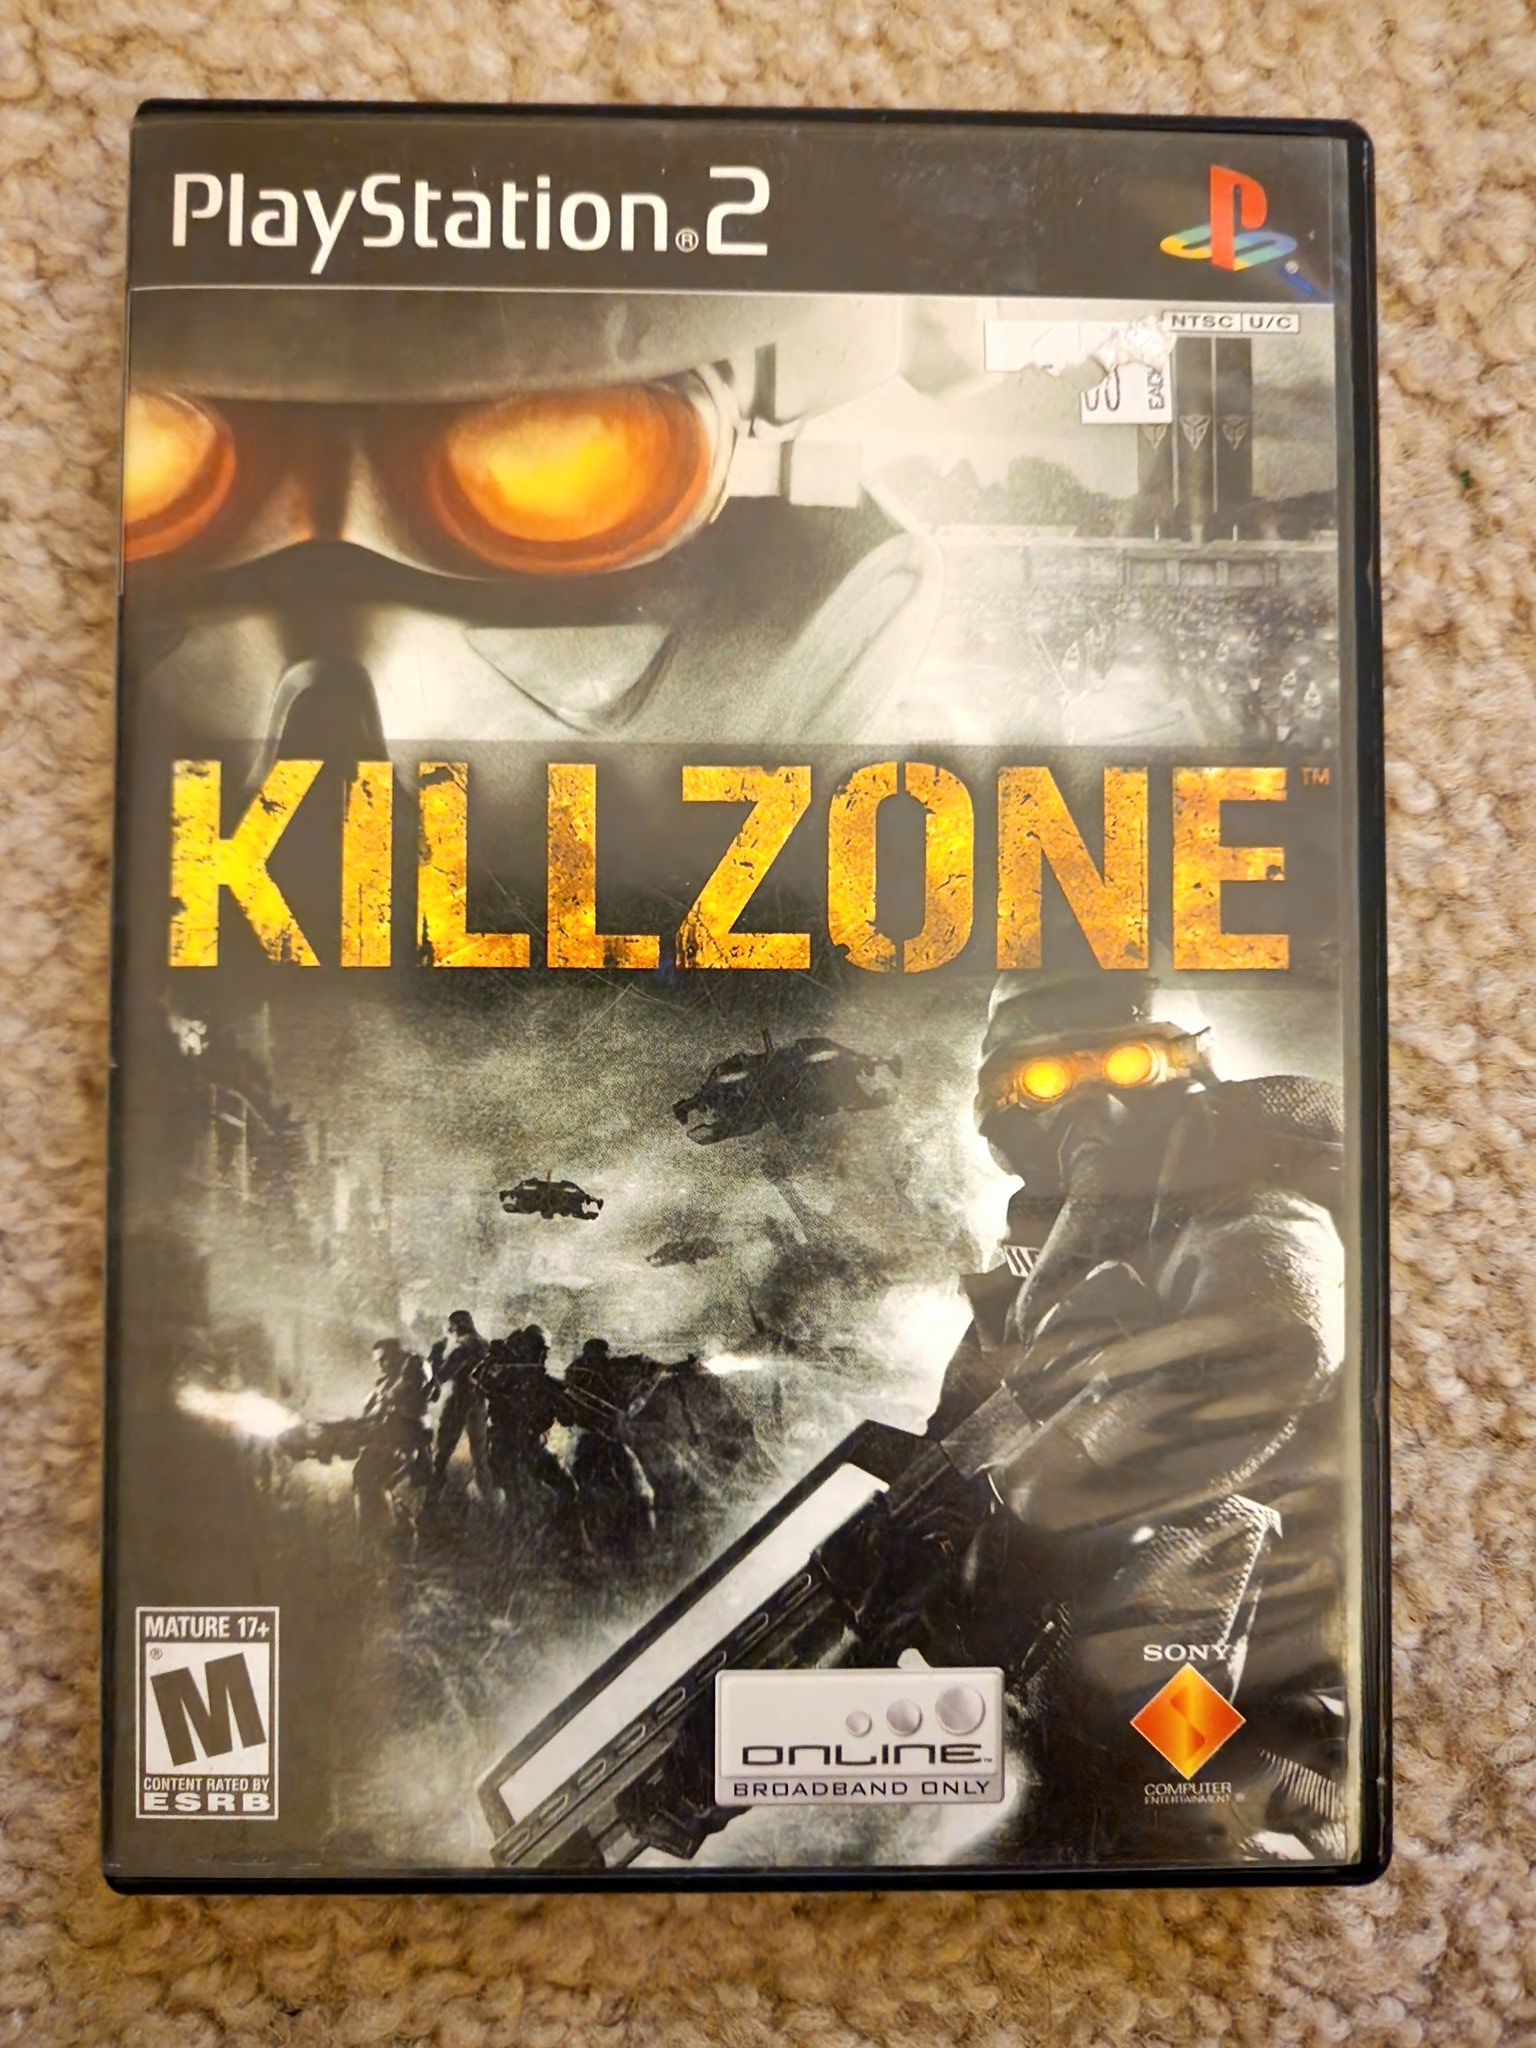 TCMFGames on X: Killzone Remastered Collection on PS5 • Next year